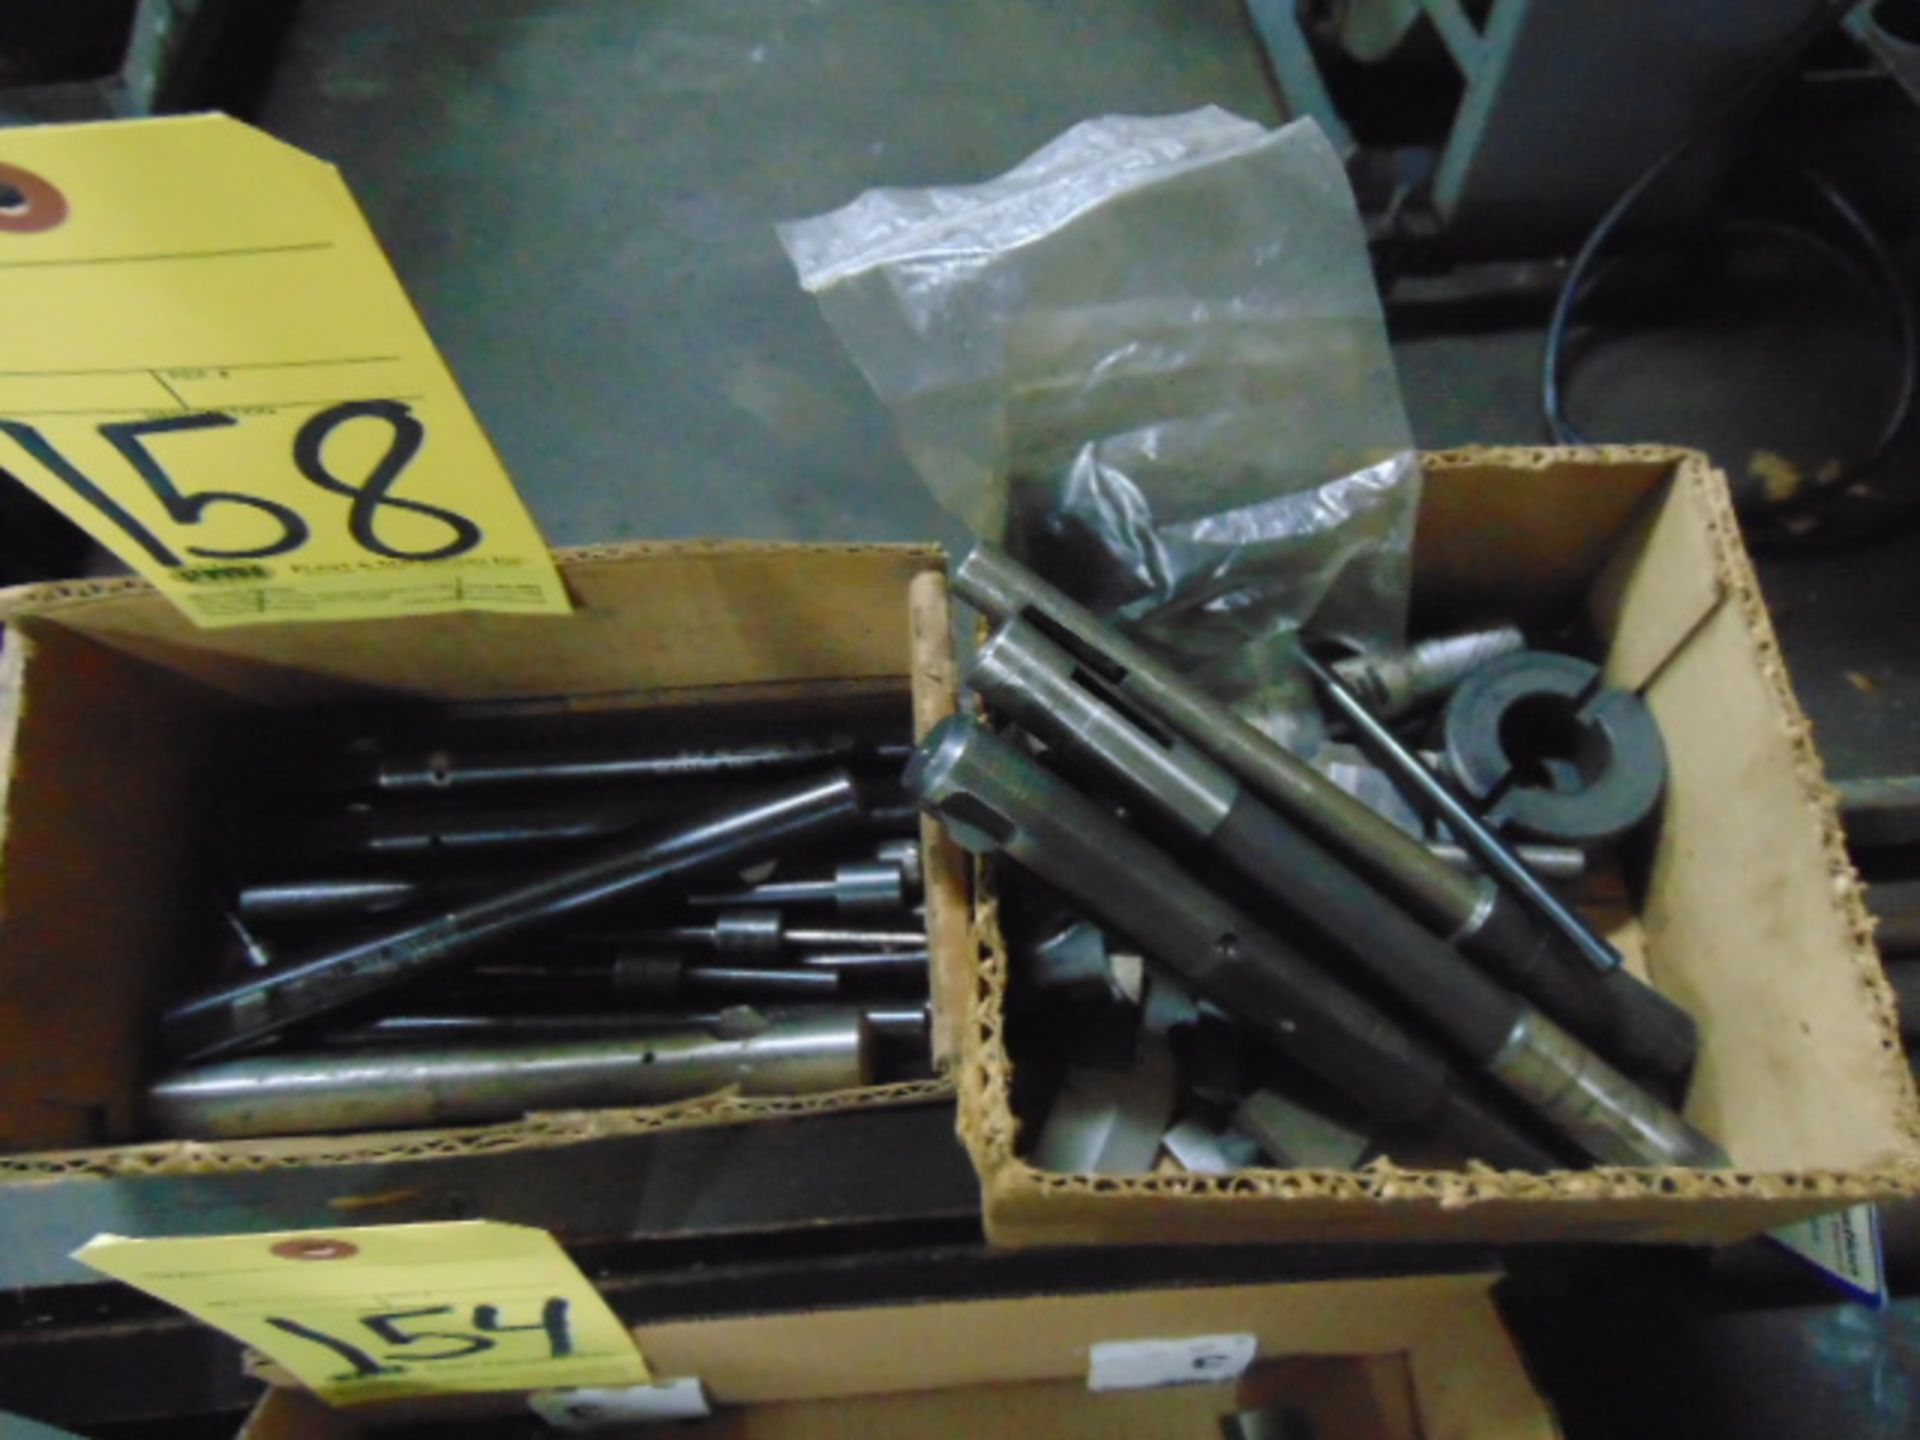 LOT OF DEBURRING TOOLS, assorted (in two boxes)